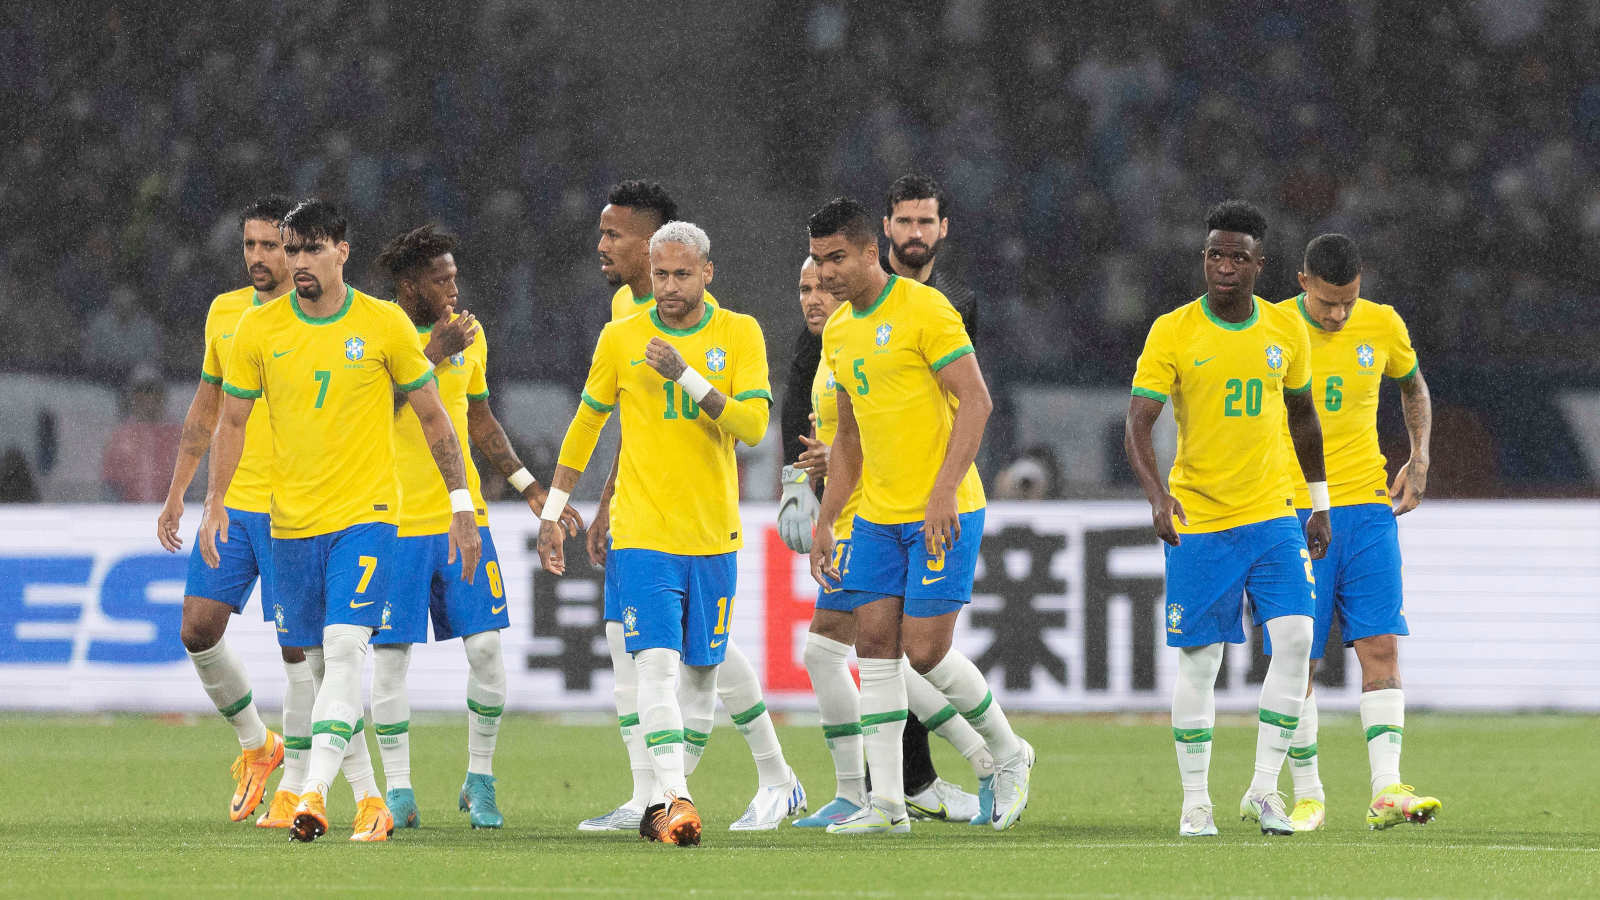 Brazil are World Cup favourites, and they have 20 years of hurt to undo in Qatar